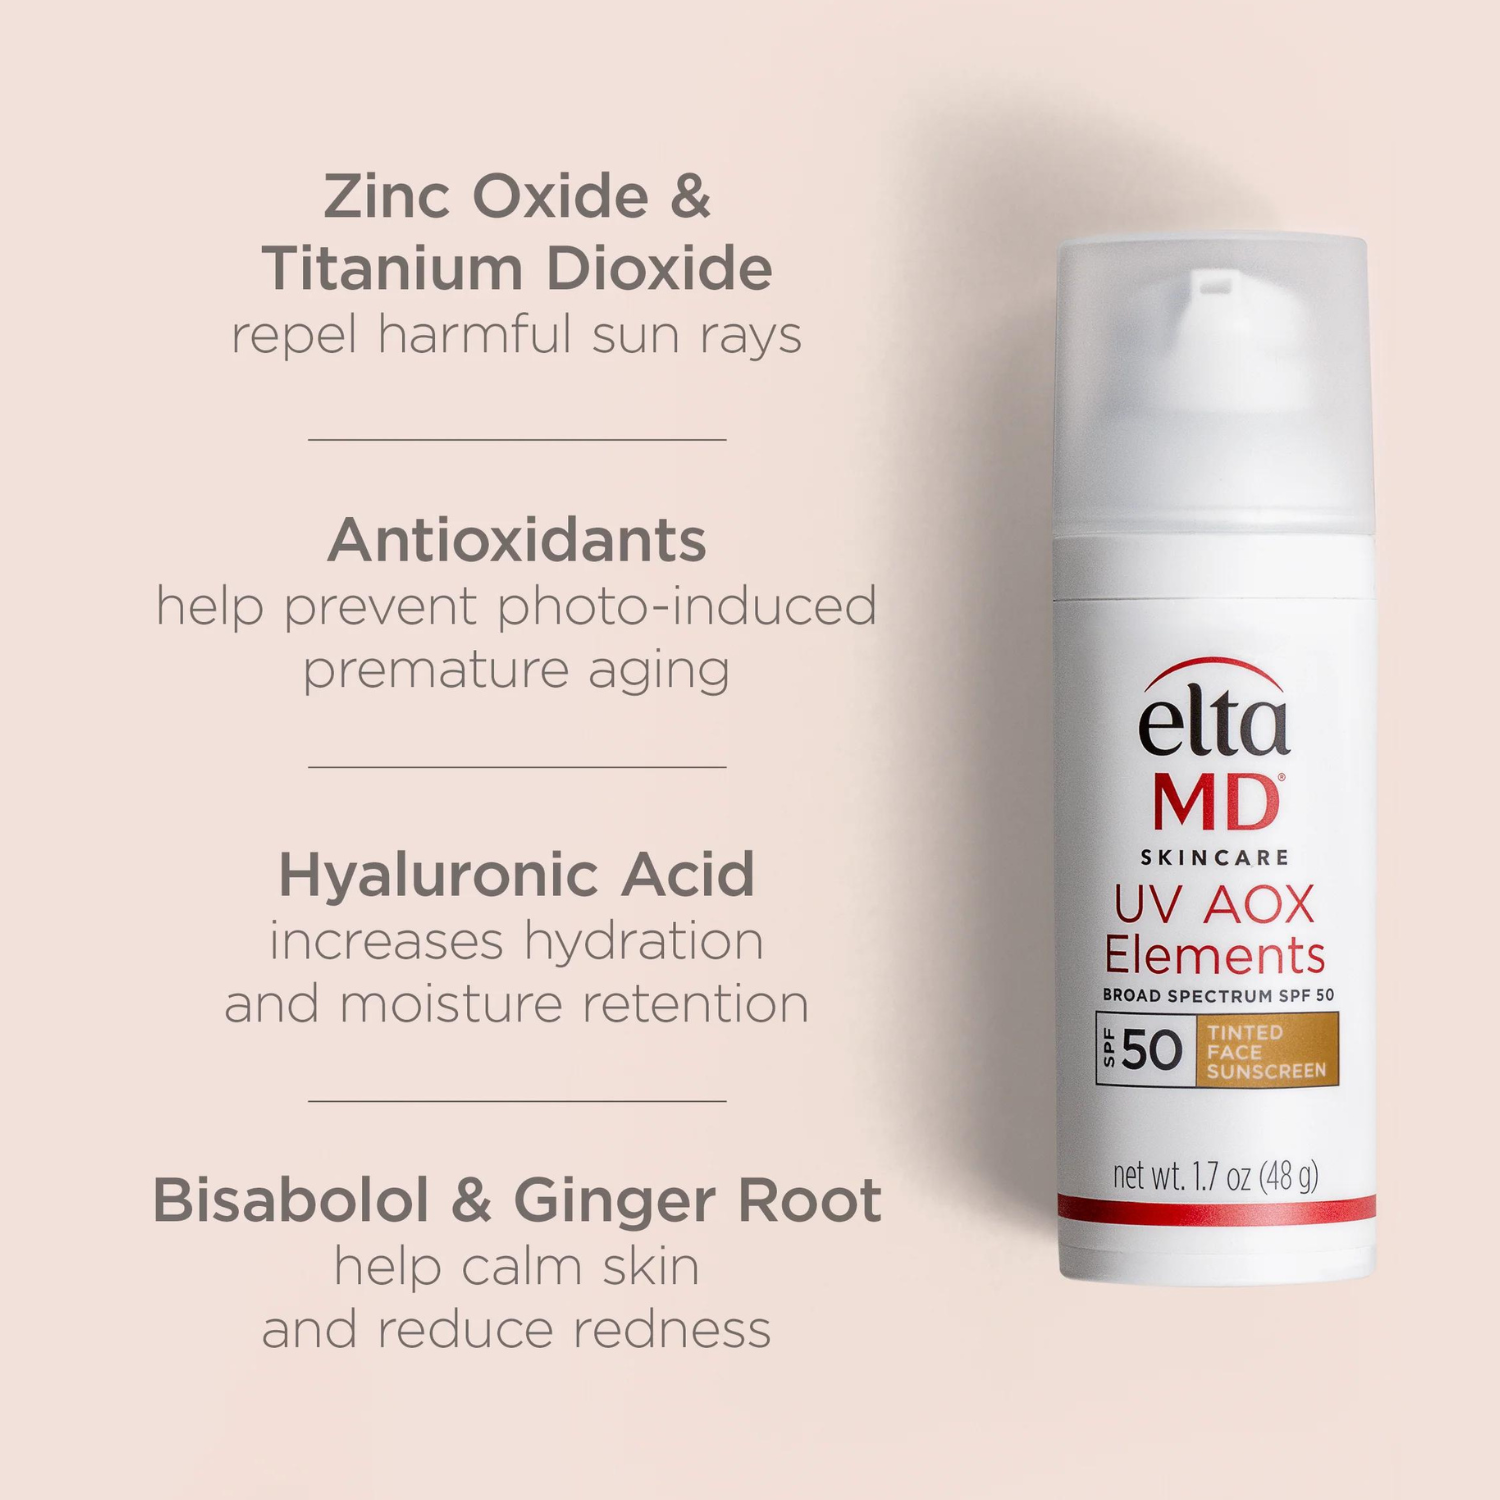 EltaMD: UV AOX Elements (Tinted Face Sunscreen | Broad-Spectrum SPF 50)